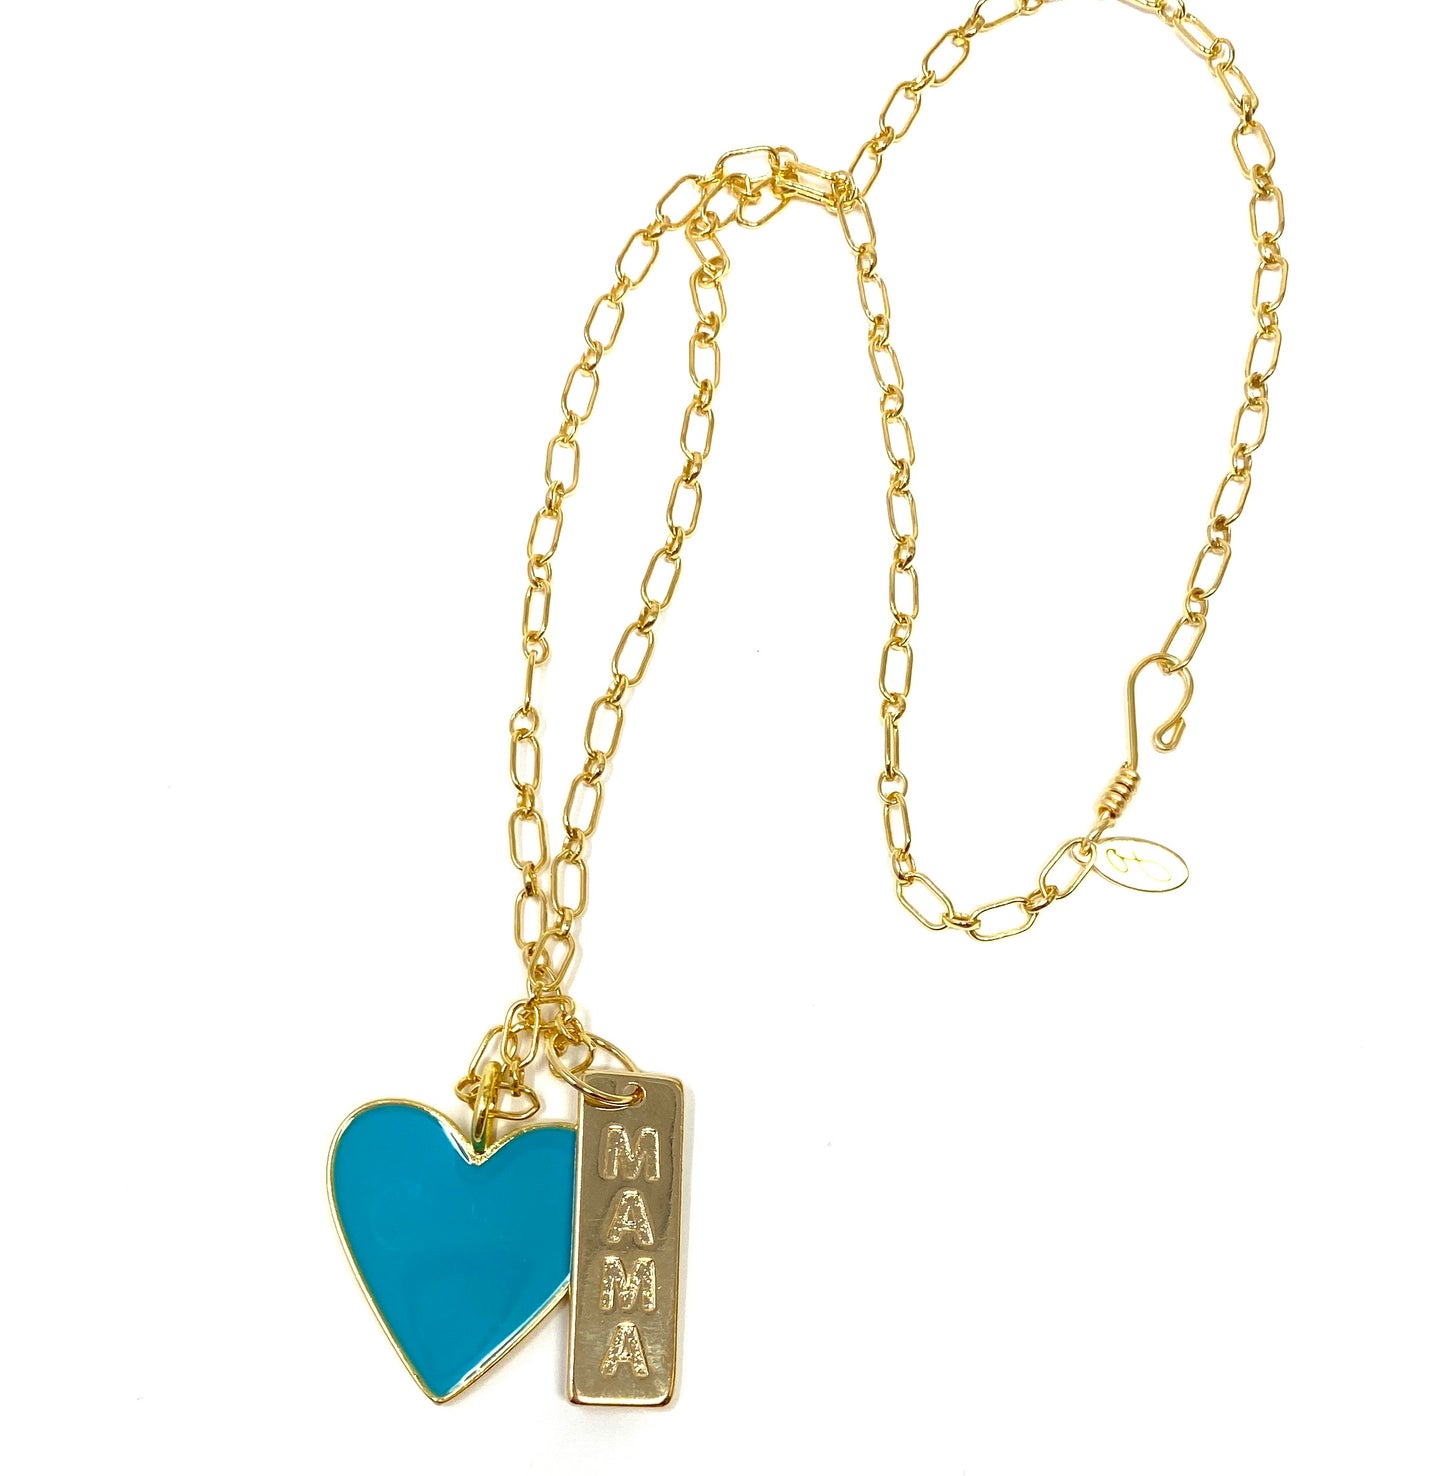 Mama and Heart Necklace